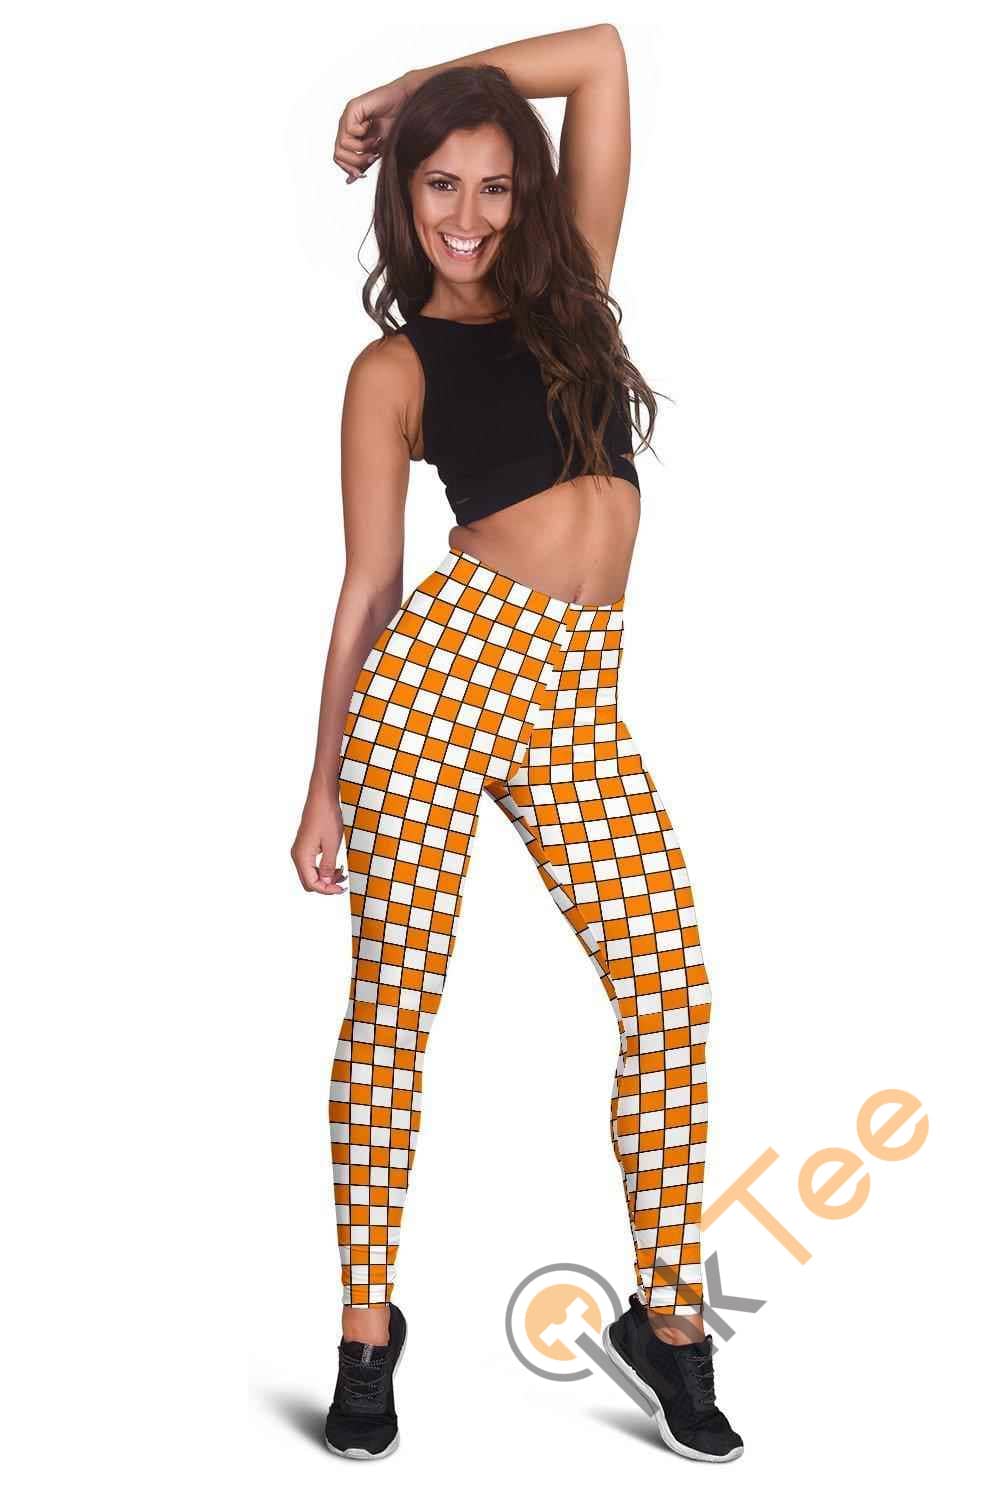 Inktee Store - Tennessee Volunteers Fan Inspired 3D All Over Print For Yoga Fitness Checkers Women'S Leggings Image